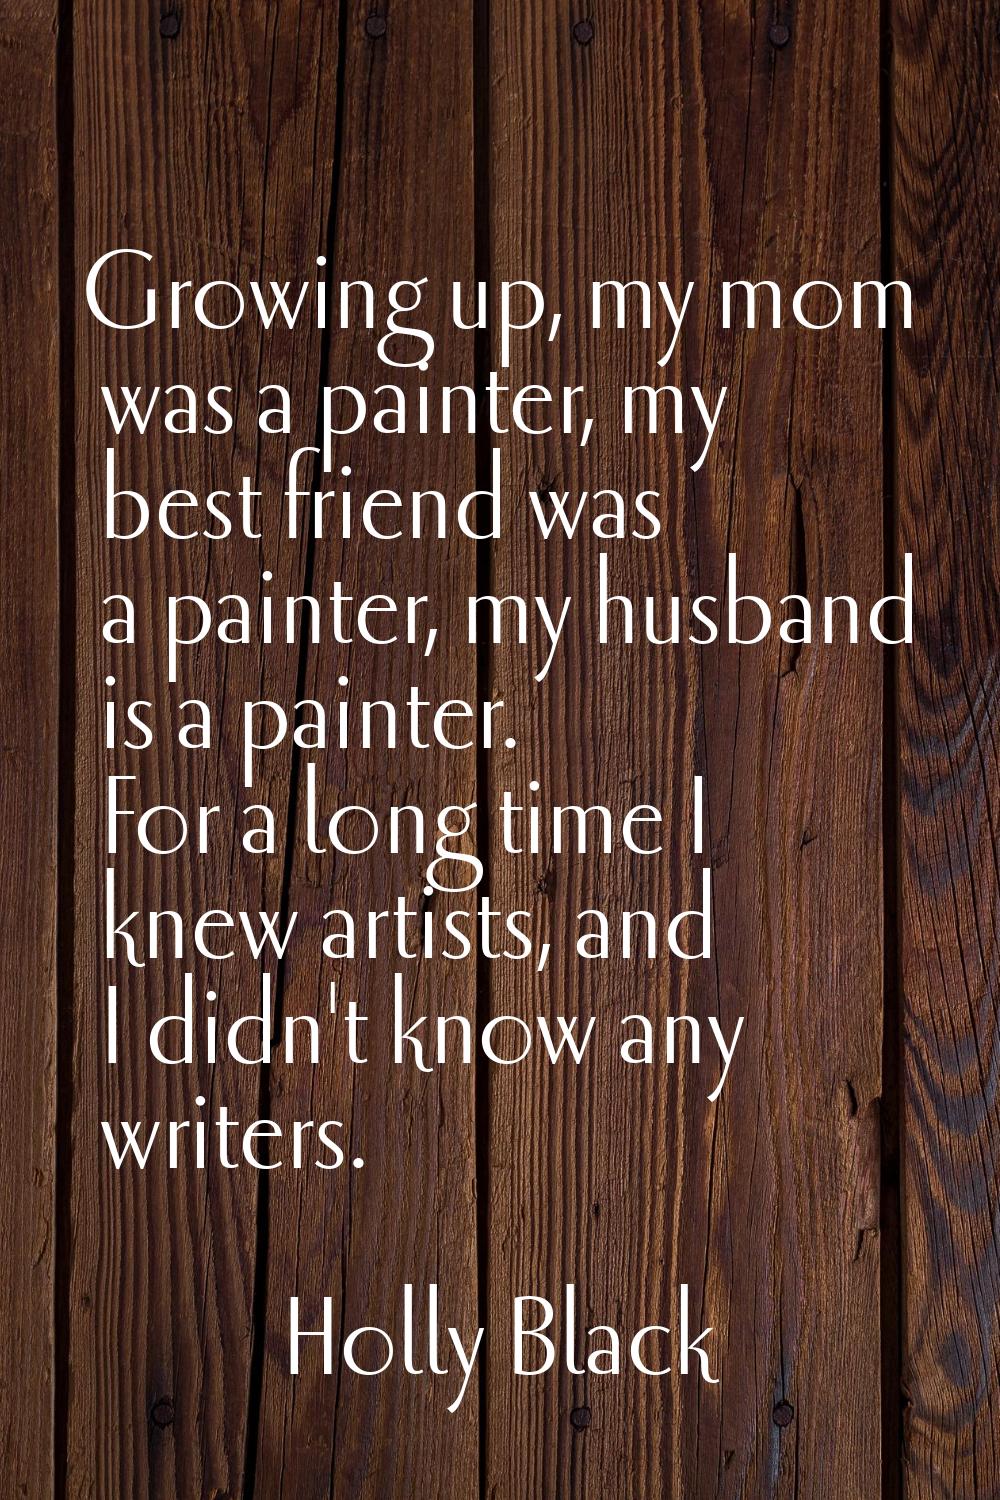 Growing up, my mom was a painter, my best friend was a painter, my husband is a painter. For a long